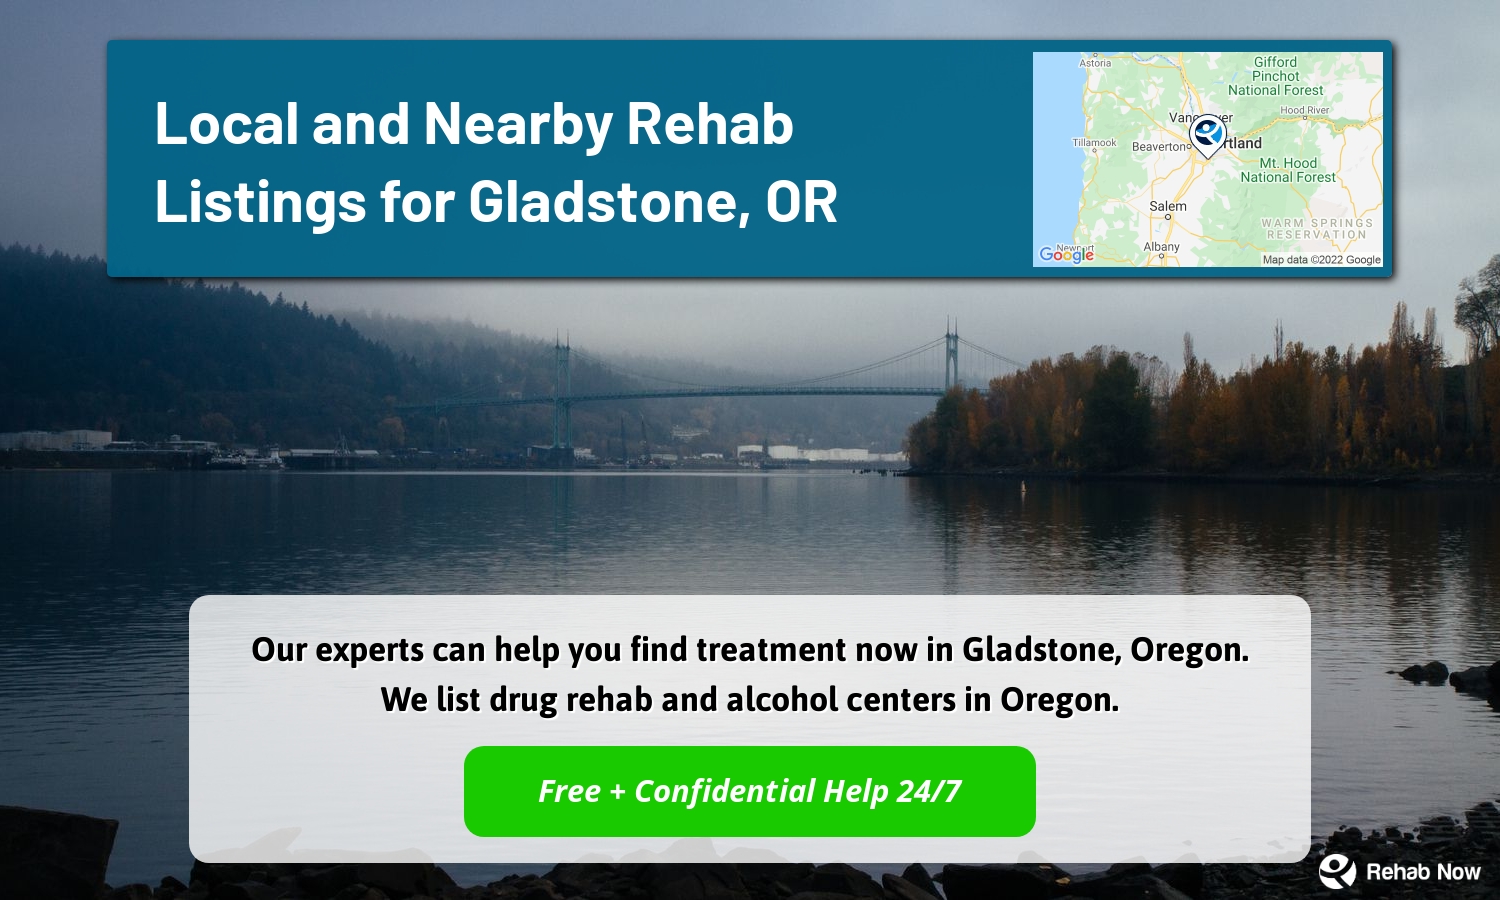 Our experts can help you find treatment now in Gladstone, Oregon. We list drug rehab and alcohol centers in Oregon.